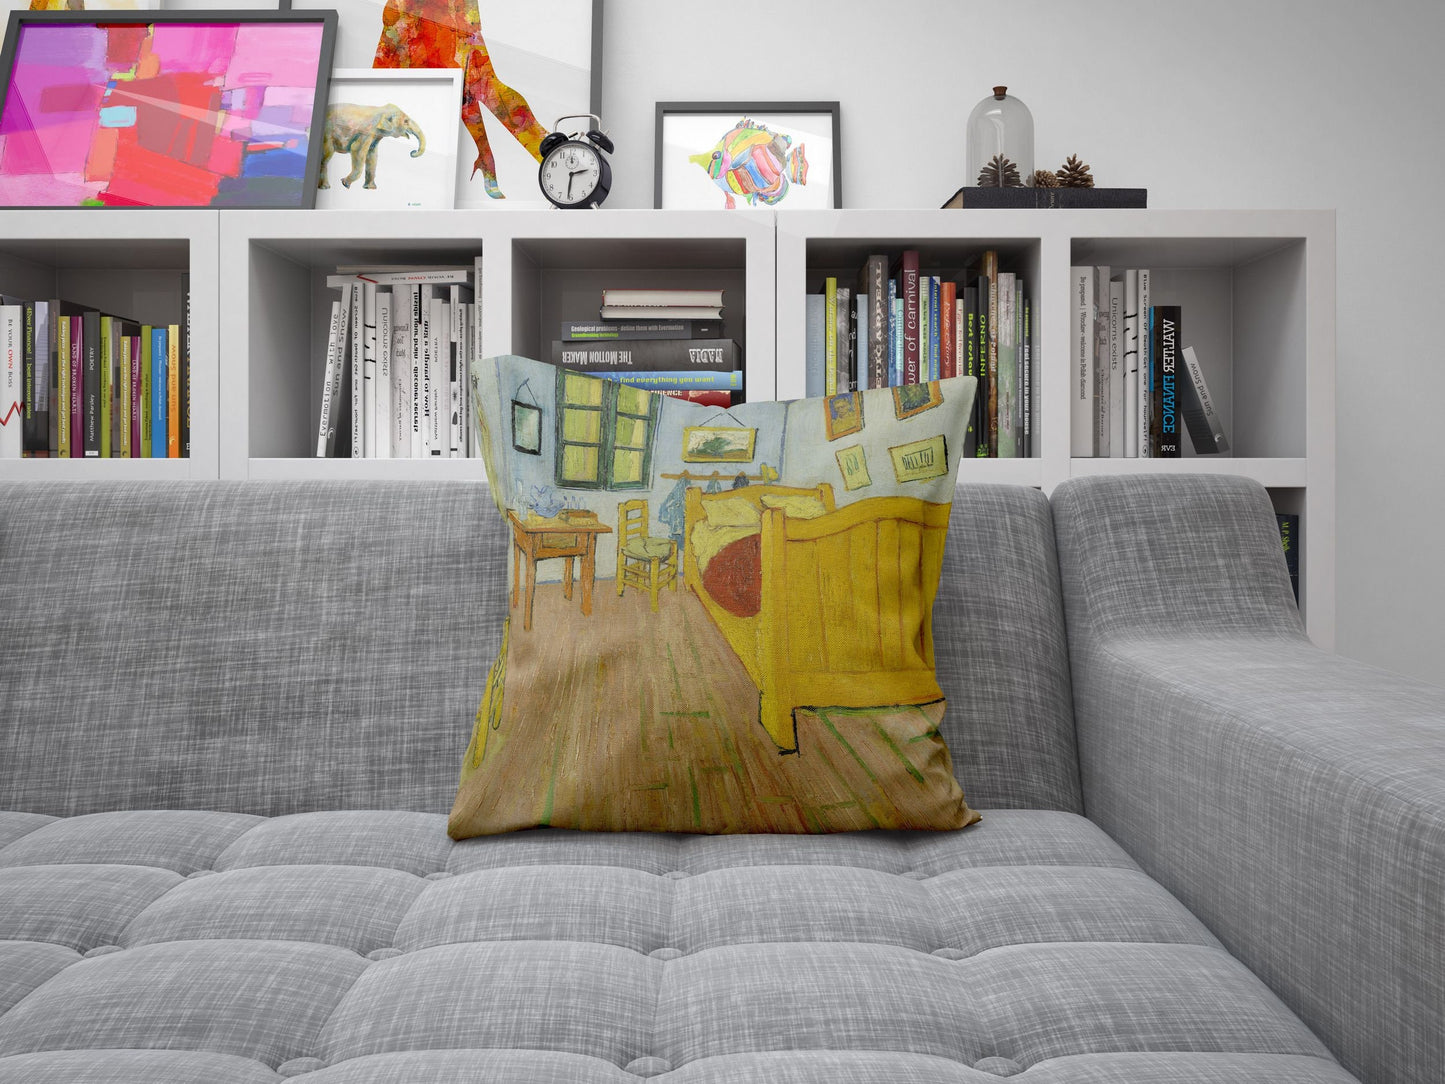 Vincent Van Gogh The Bedroom, Tapestry Pillows, Abstract Throw Pillow Cover, Art Pillow, Bright Yellow Pillow,Farmhouse Decor